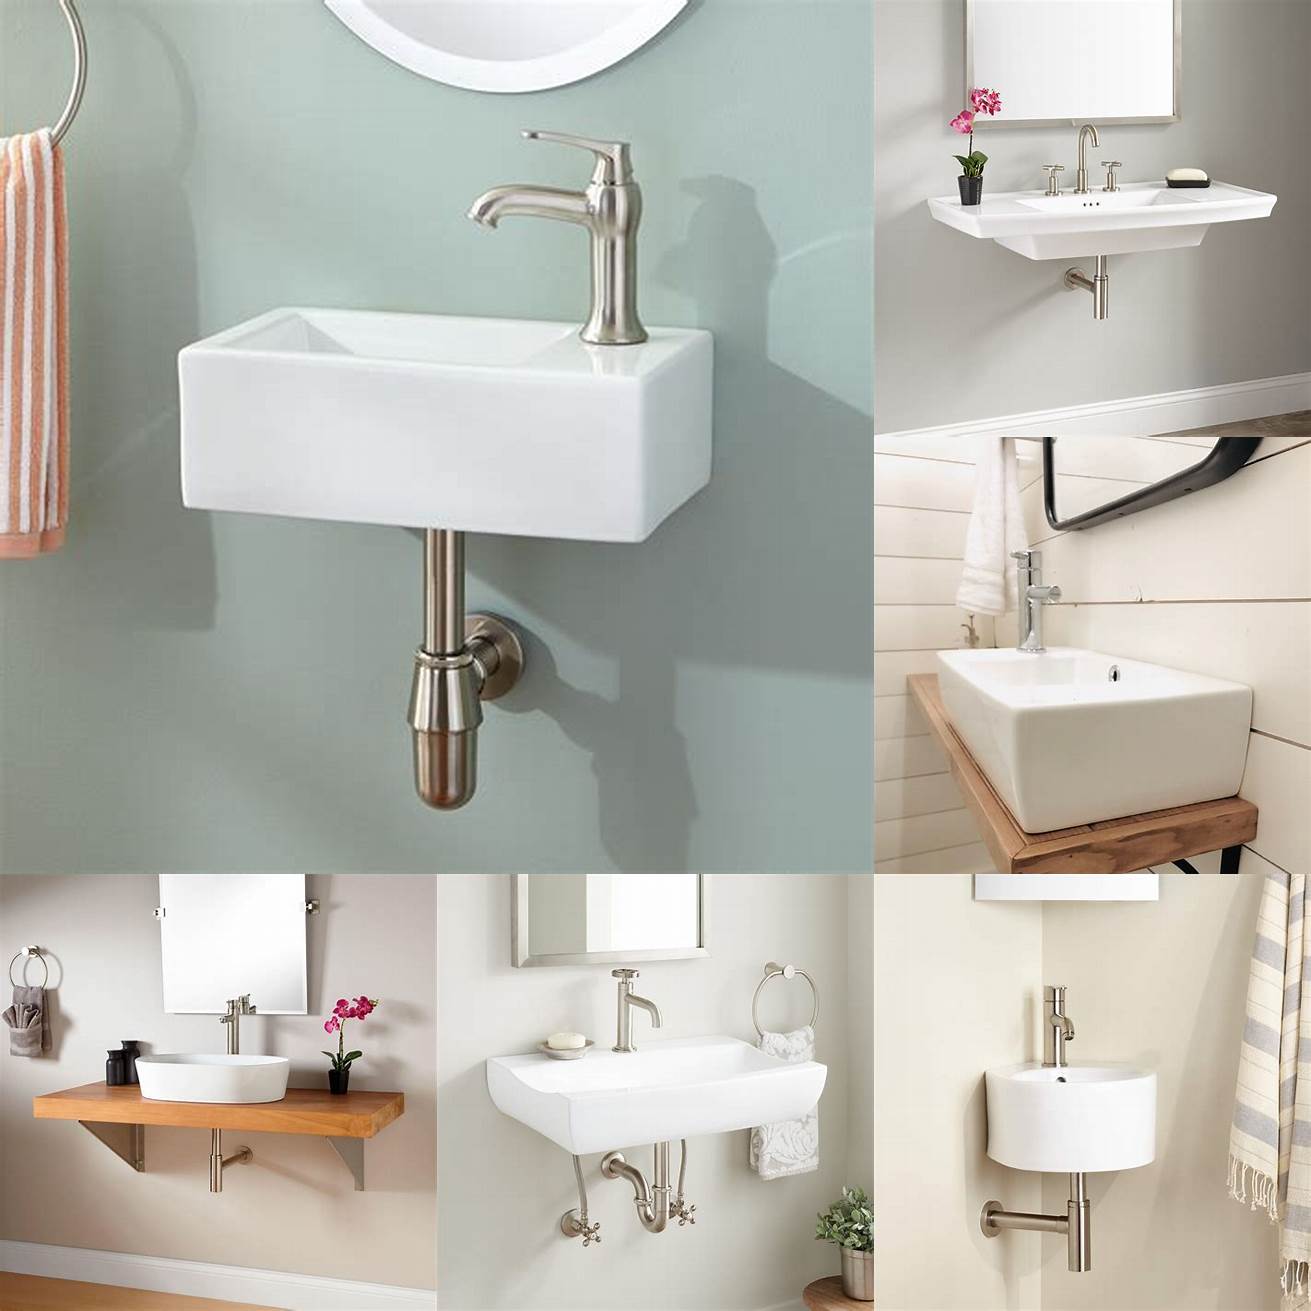 Wall-mounted sinks are attached to the wall freeing up floor space and making your bathroom look bigger They are easy to clean and maintain and come in different shapes and sizes However they dont provide storage space